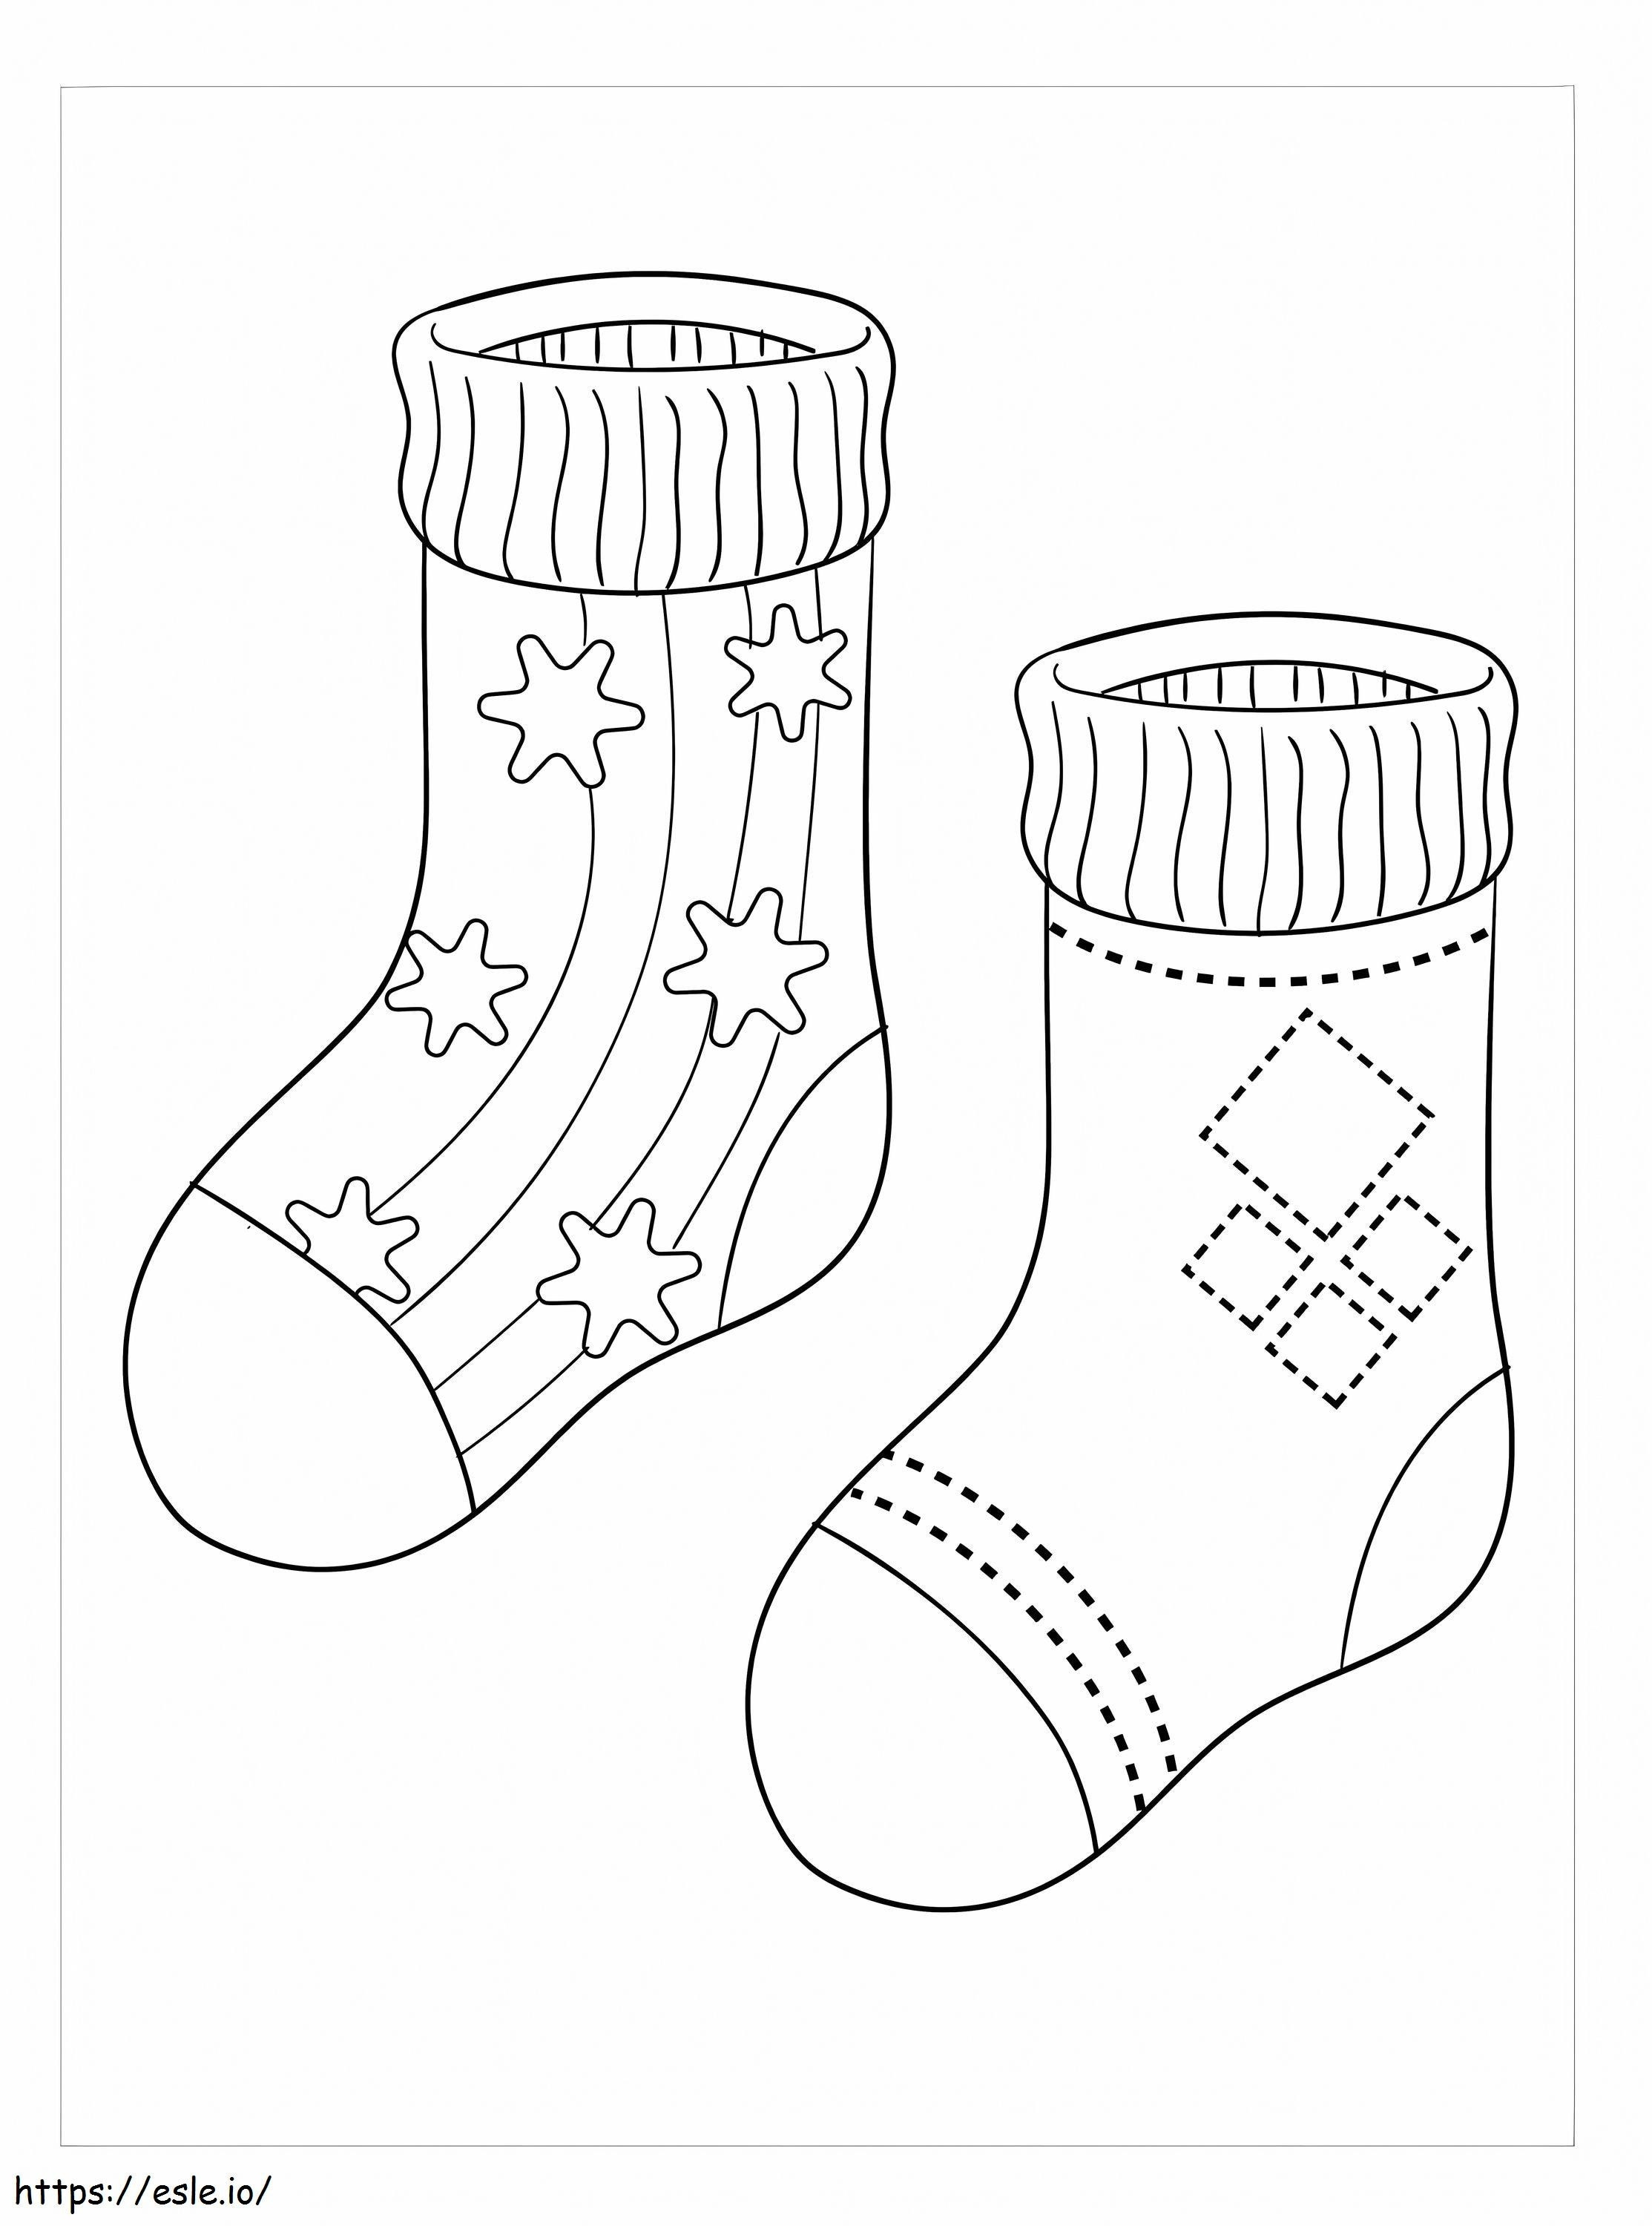 Cute Socks coloring page